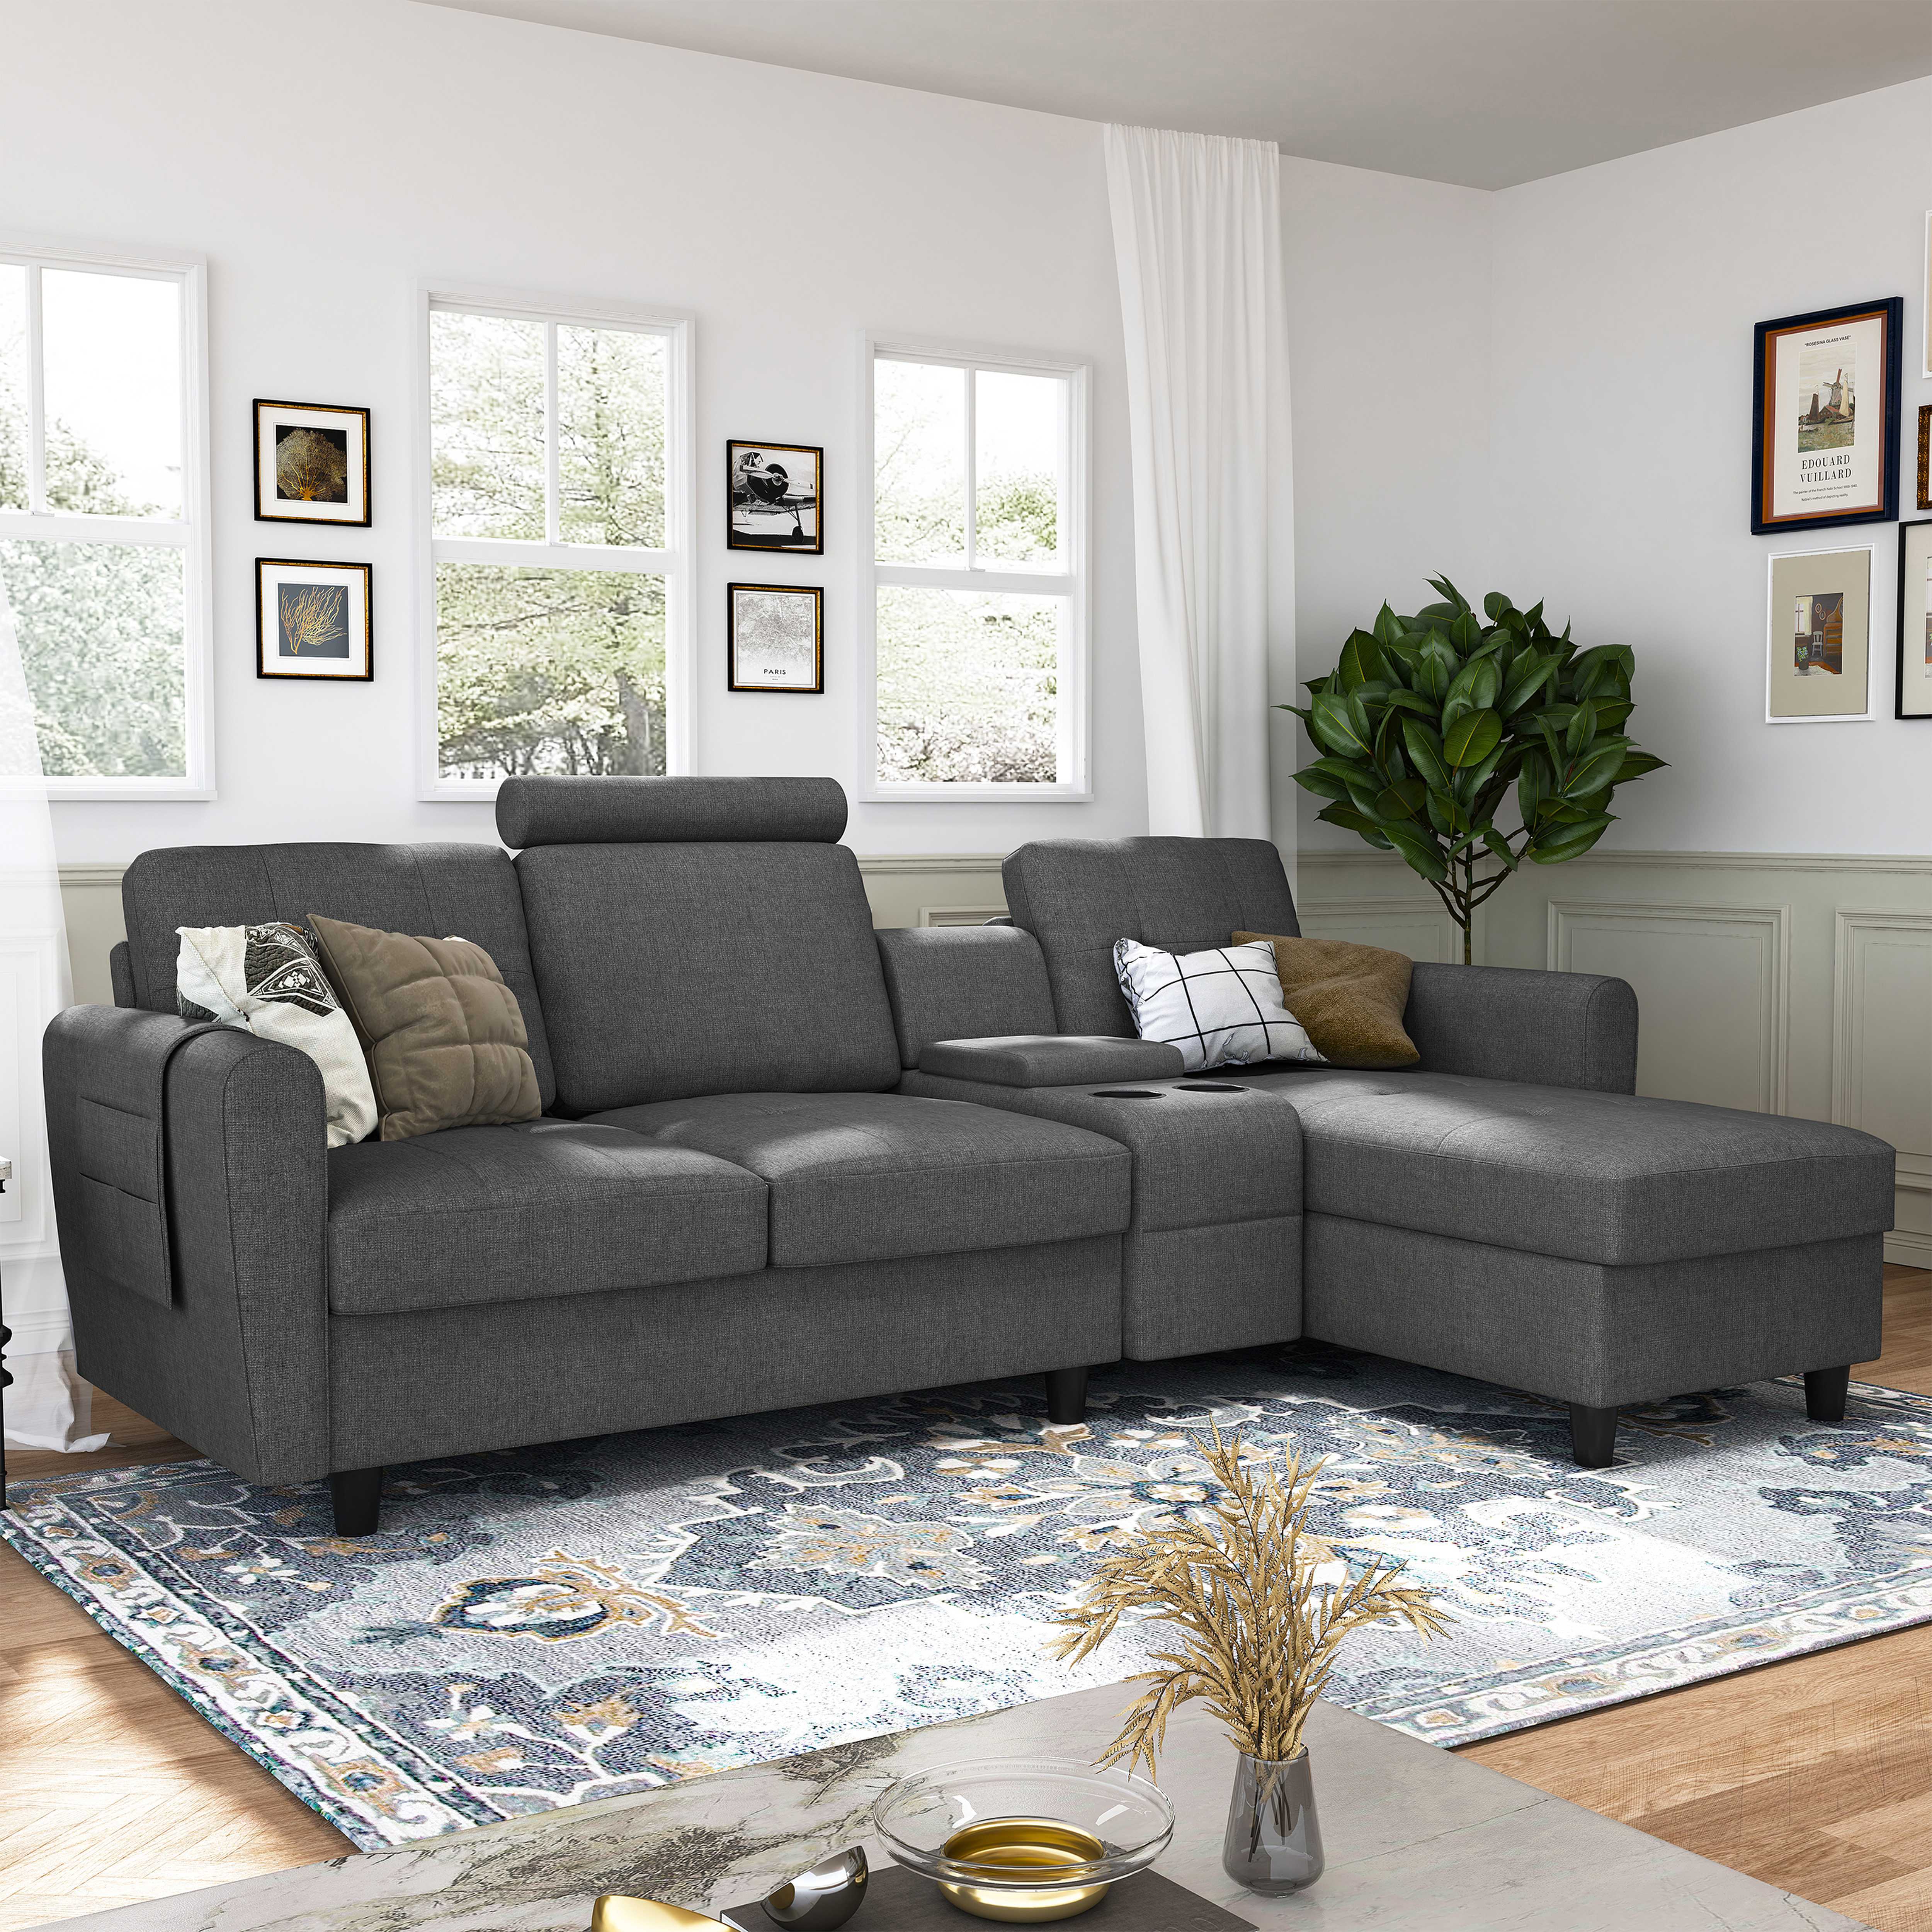 HONBAY Upholstered Fabric Sofa Couch Modern L-Shaped Reversible Sectional Sofa with Cup Holders & Storage Console for Living Room and Office, Dark Grey - image 3 of 10